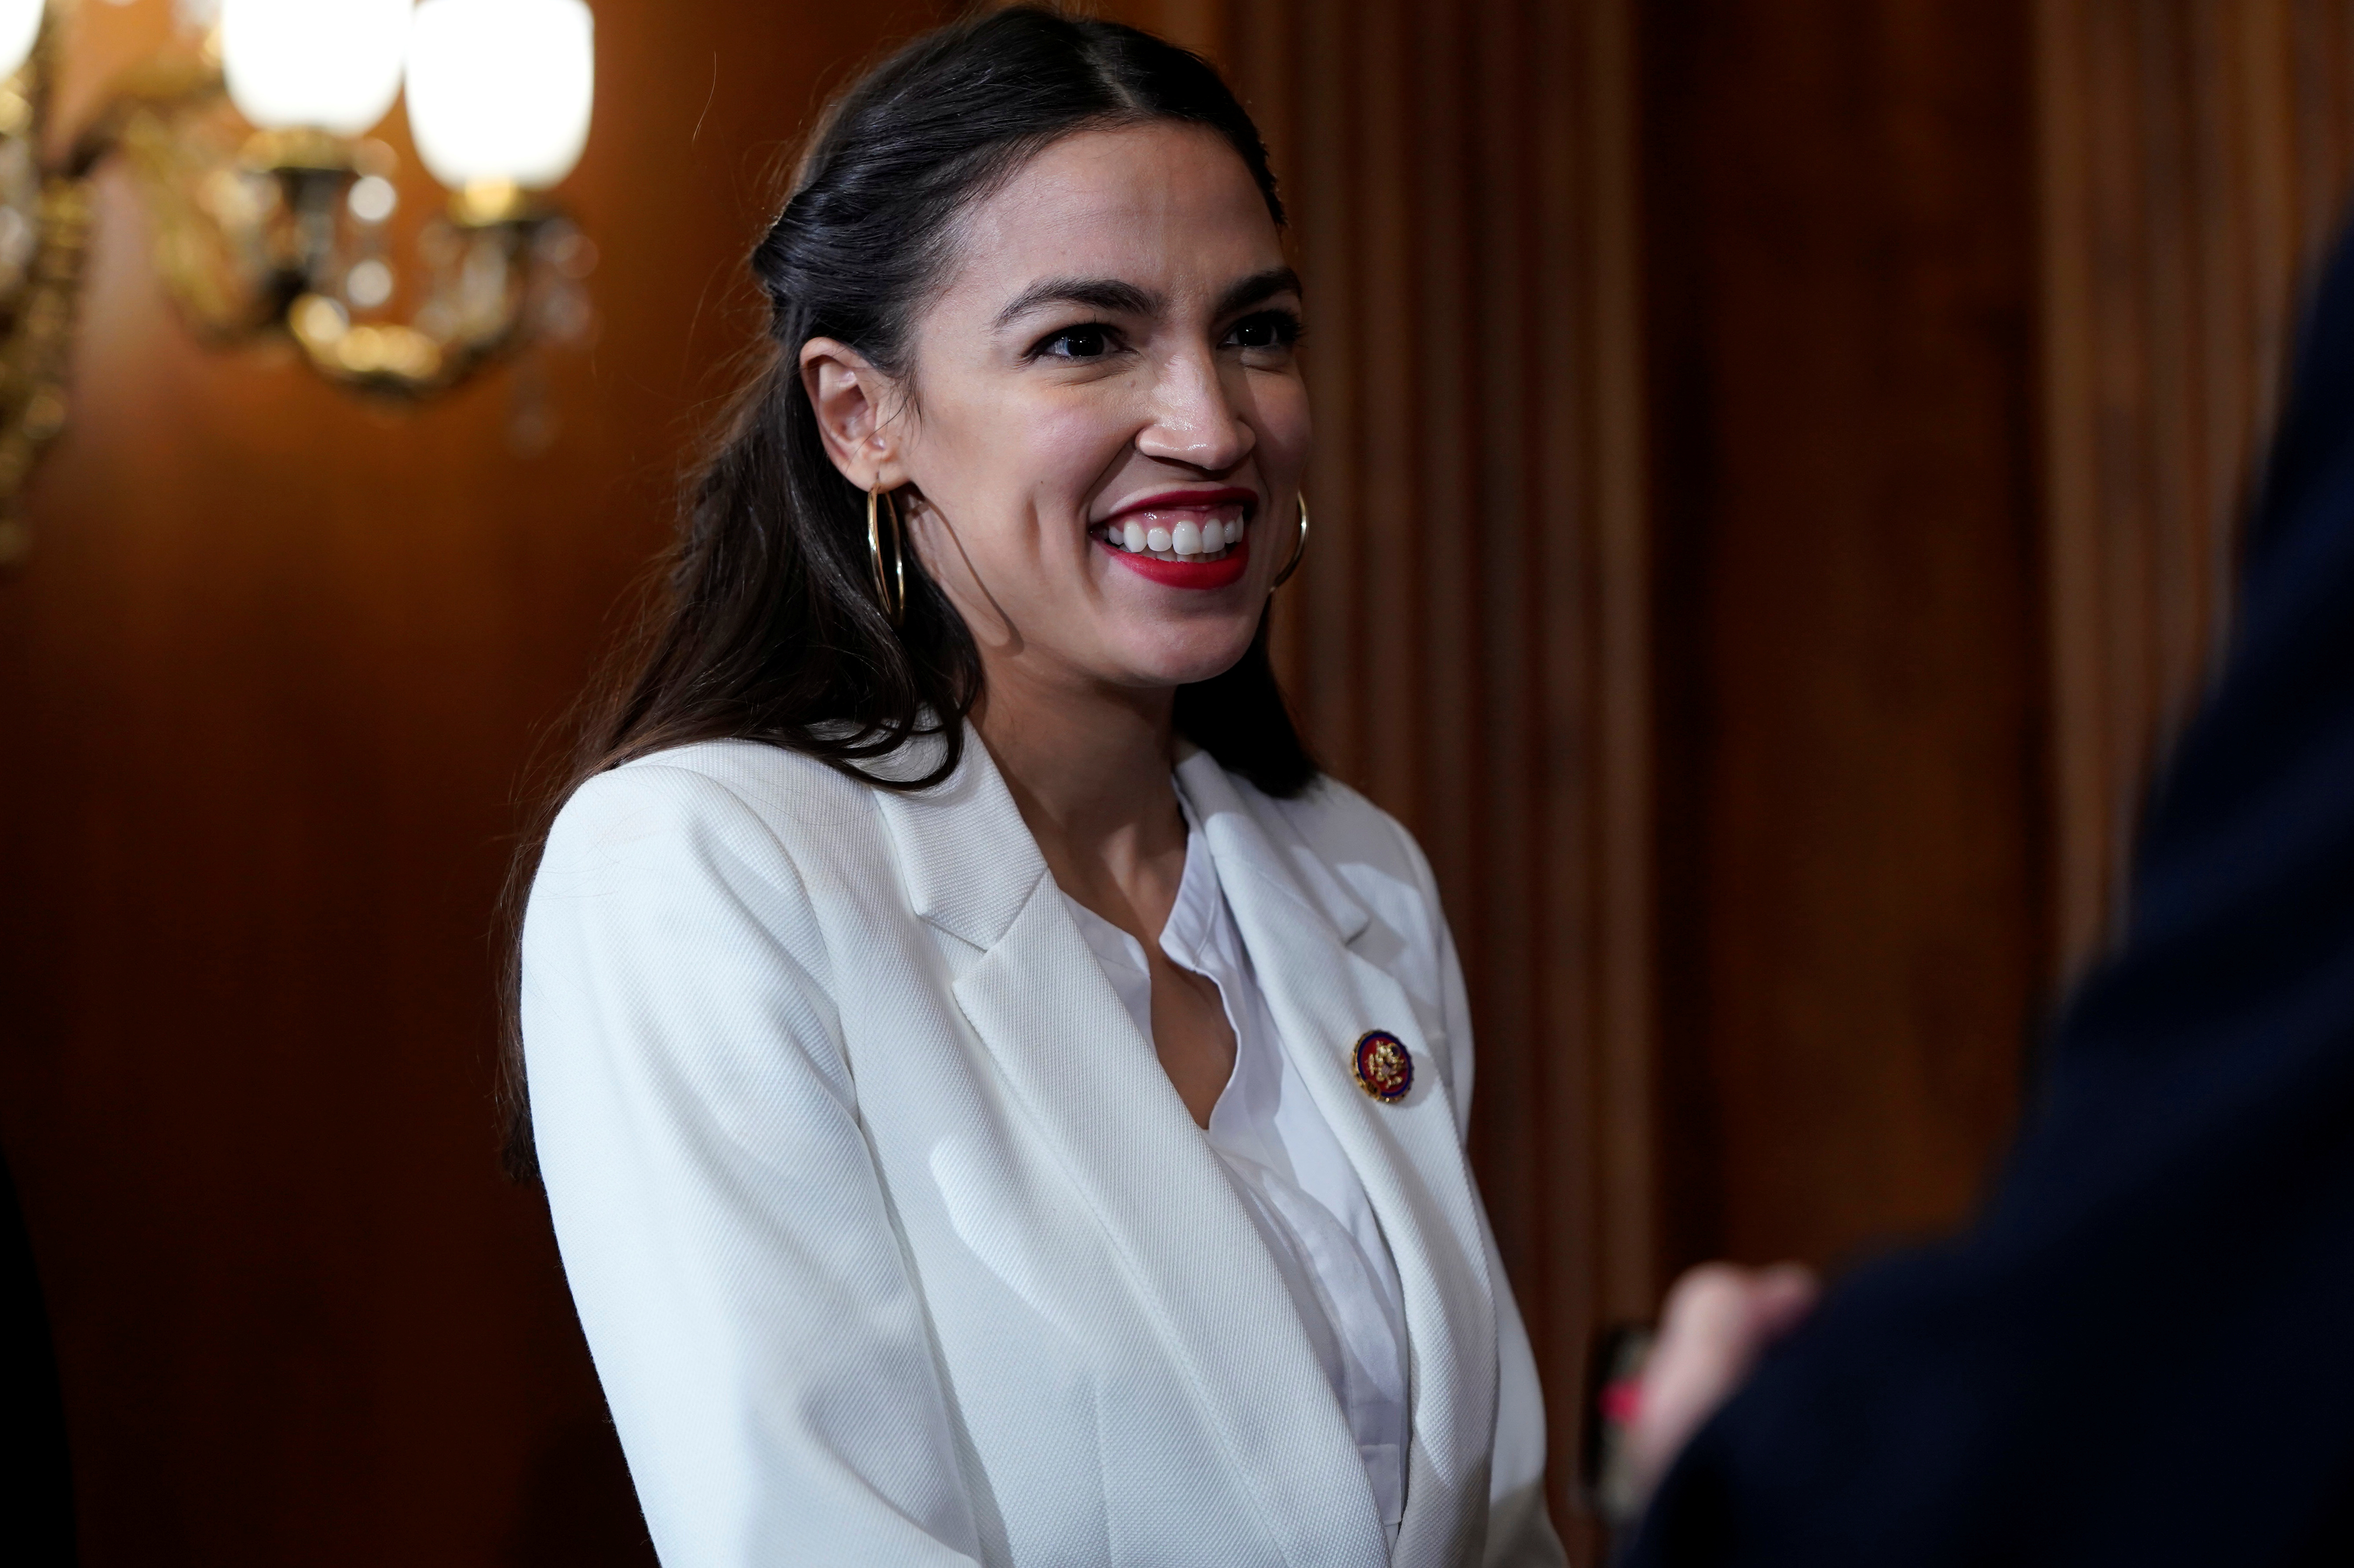 Rep. Alexandria Ocasio-Cortez (D-NY) waits for a ceremonial swearing-in picture on Capitol Hill in Washington